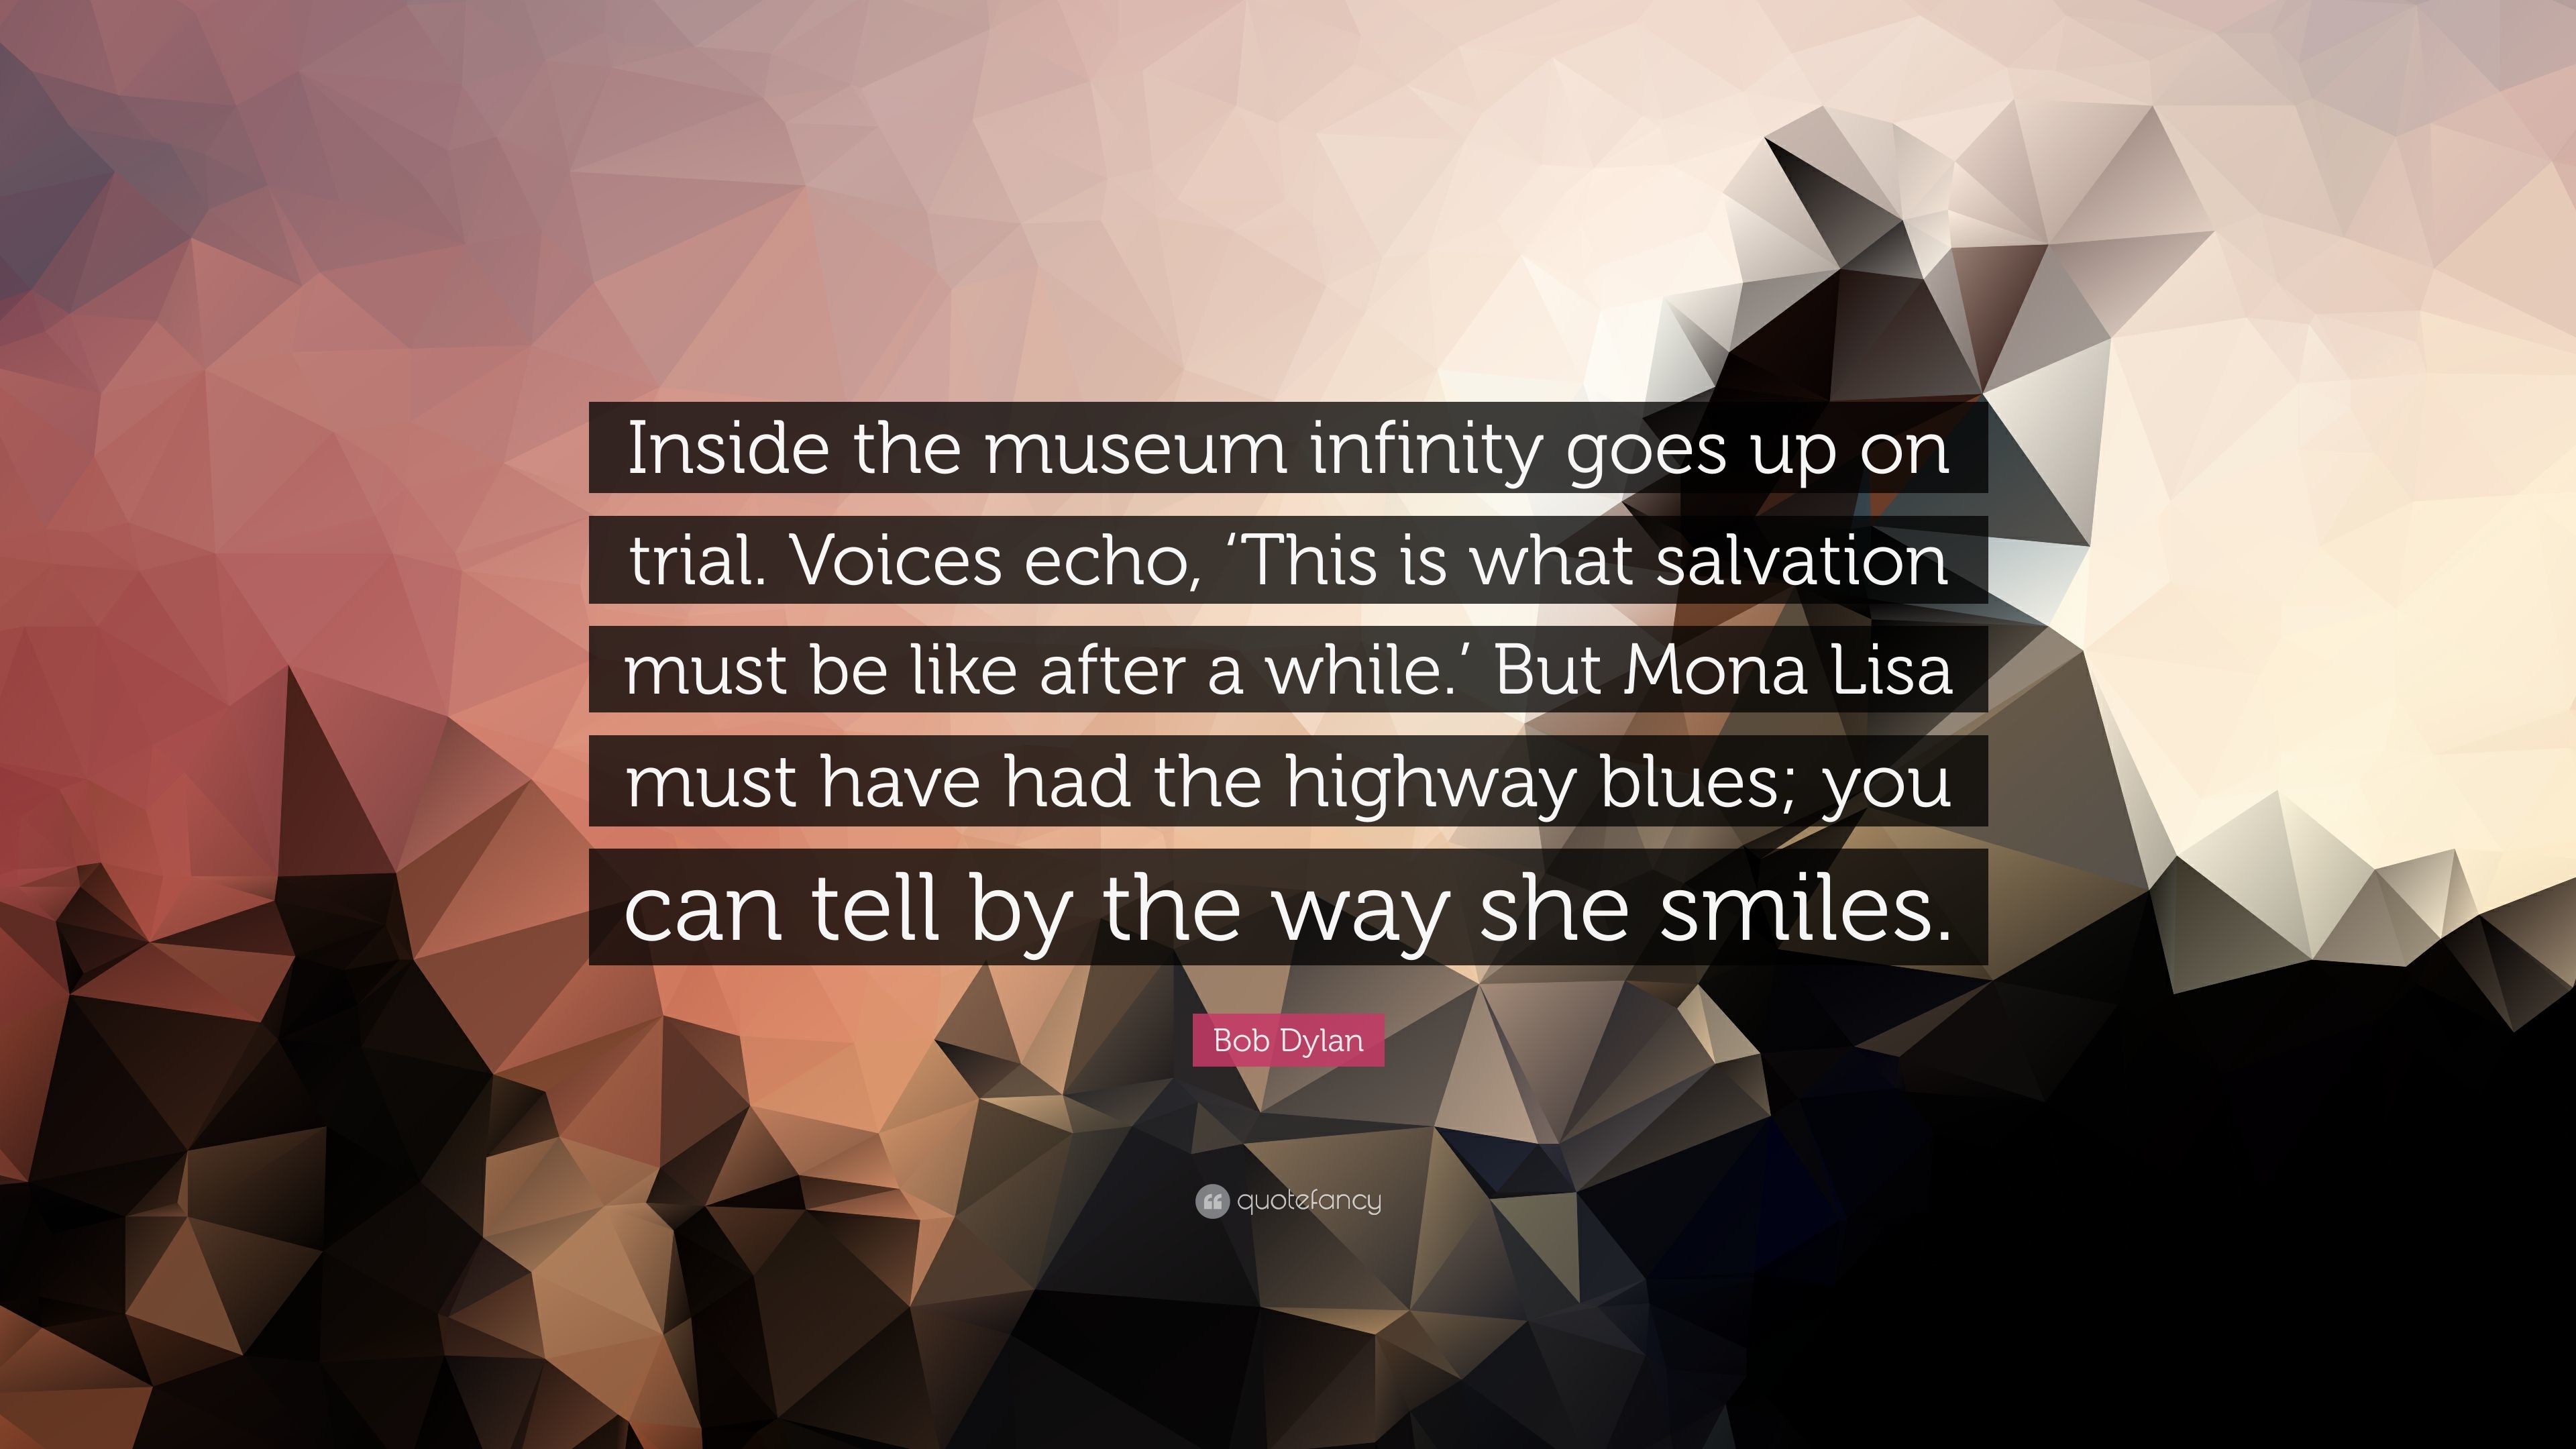 3840x2160 Bob Dylan Quote: “Inside the museum infinity goes up on trial. Voices echo